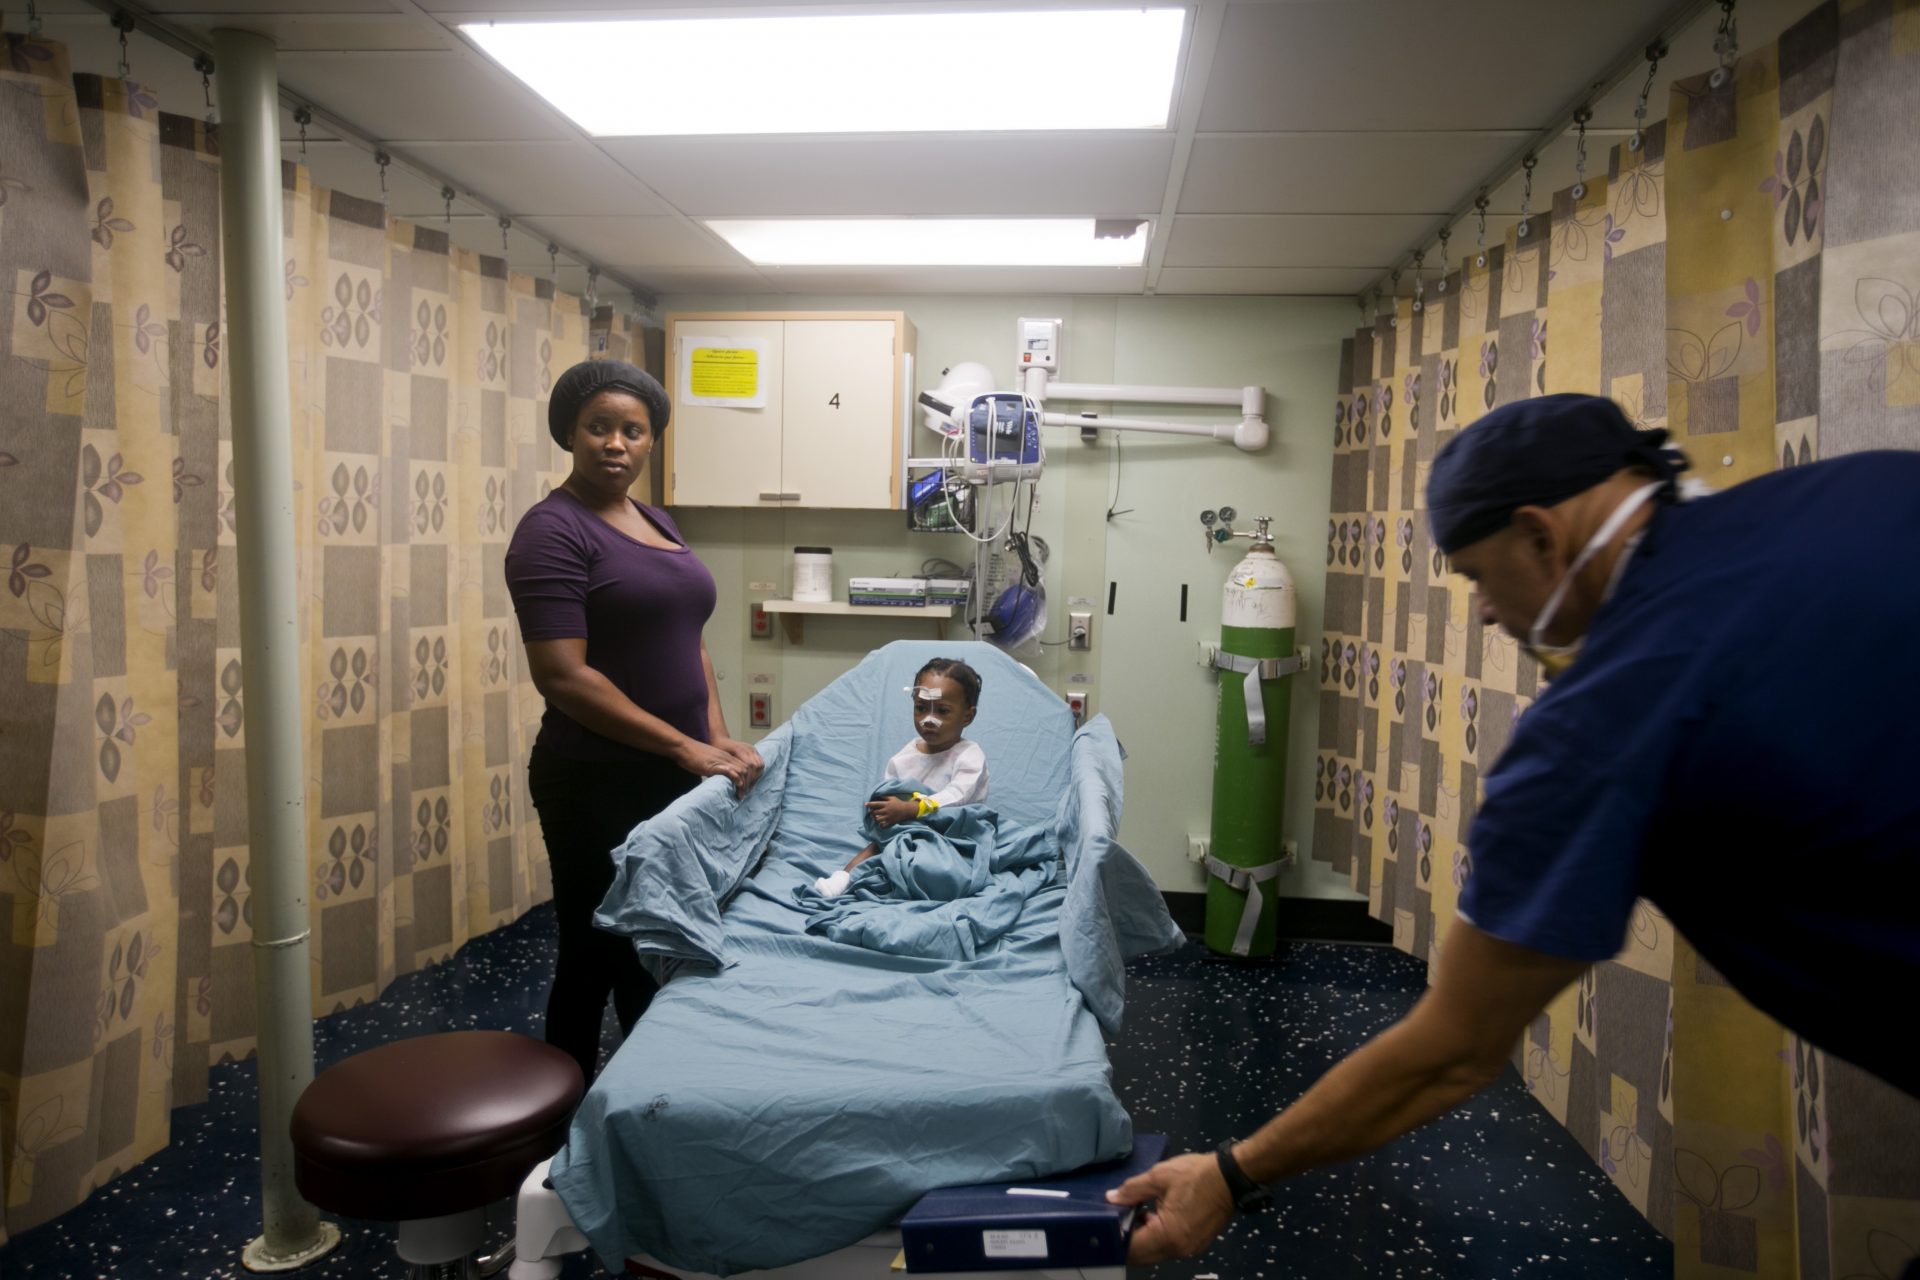 A Haitian girl gets free treatment on the U.S. Navy's hospital ship USNS Comfort anchored off Port-au-Prince, Haiti, Friday, Nov. 8, 2019. The visit of the hospital ship comes as violent demonstrations and street barricades led several hospitals across the country to run out of medical supplies.